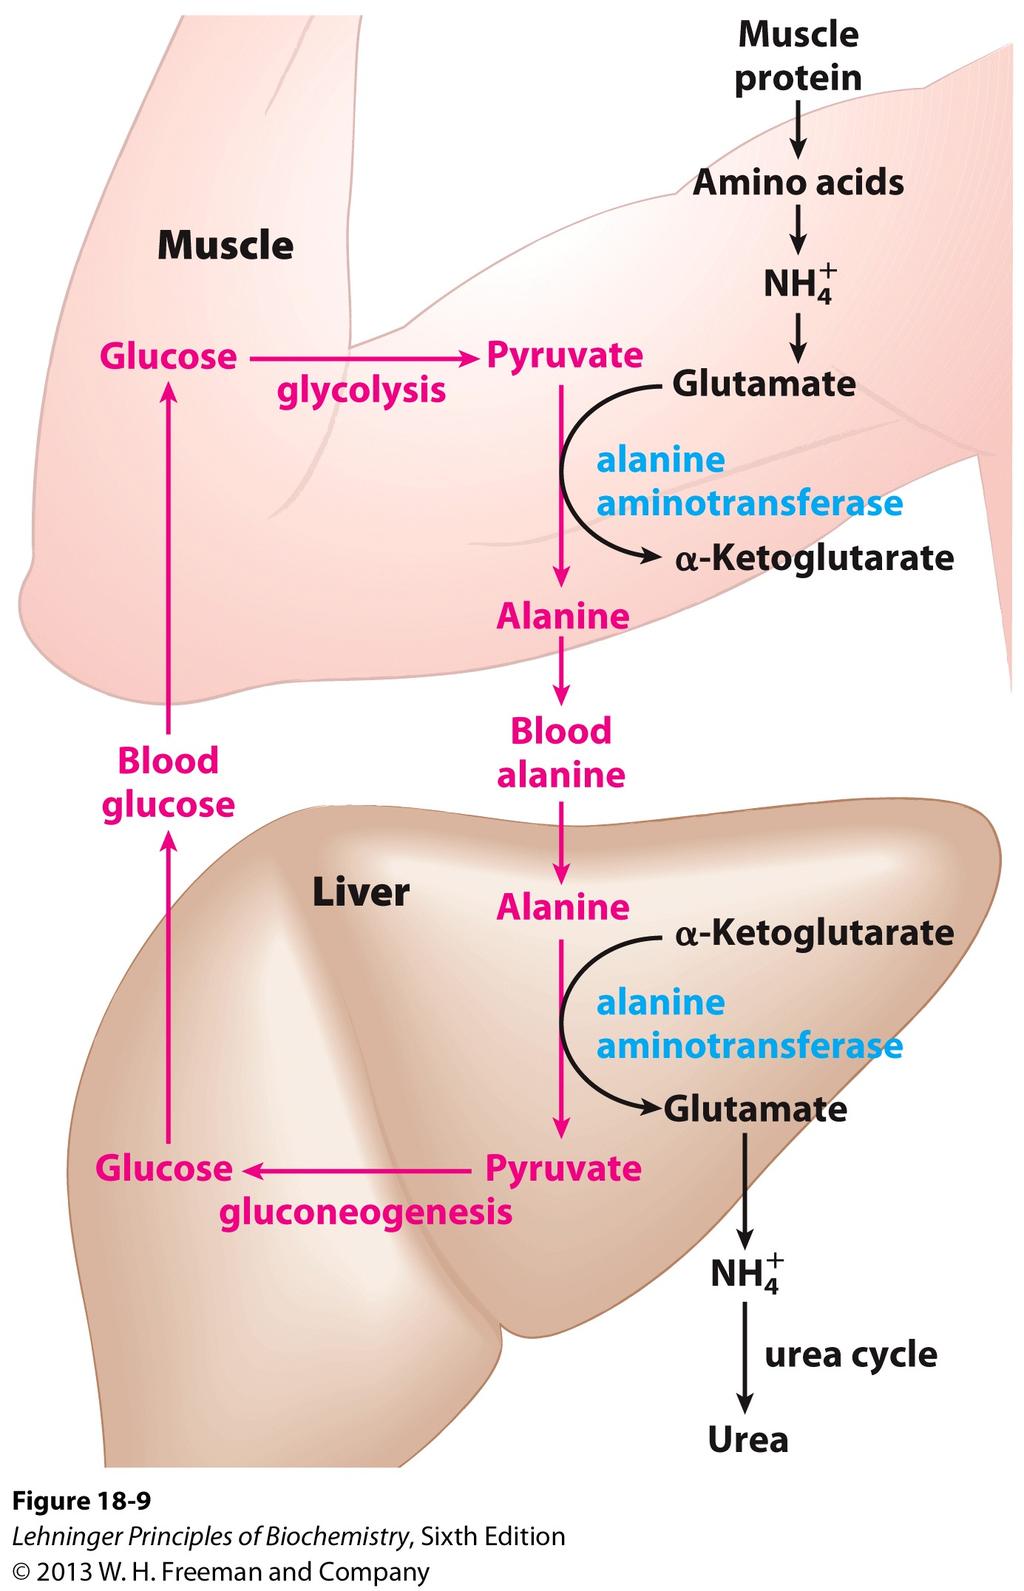 In active muscle, alanine is used to transport ammonia: NH4+ Transport to Liver: Glu is charged and cannot easily pass through cell membranes, and ammonia is toxic As elsewhere, α-kg + AA α-ka + Glu